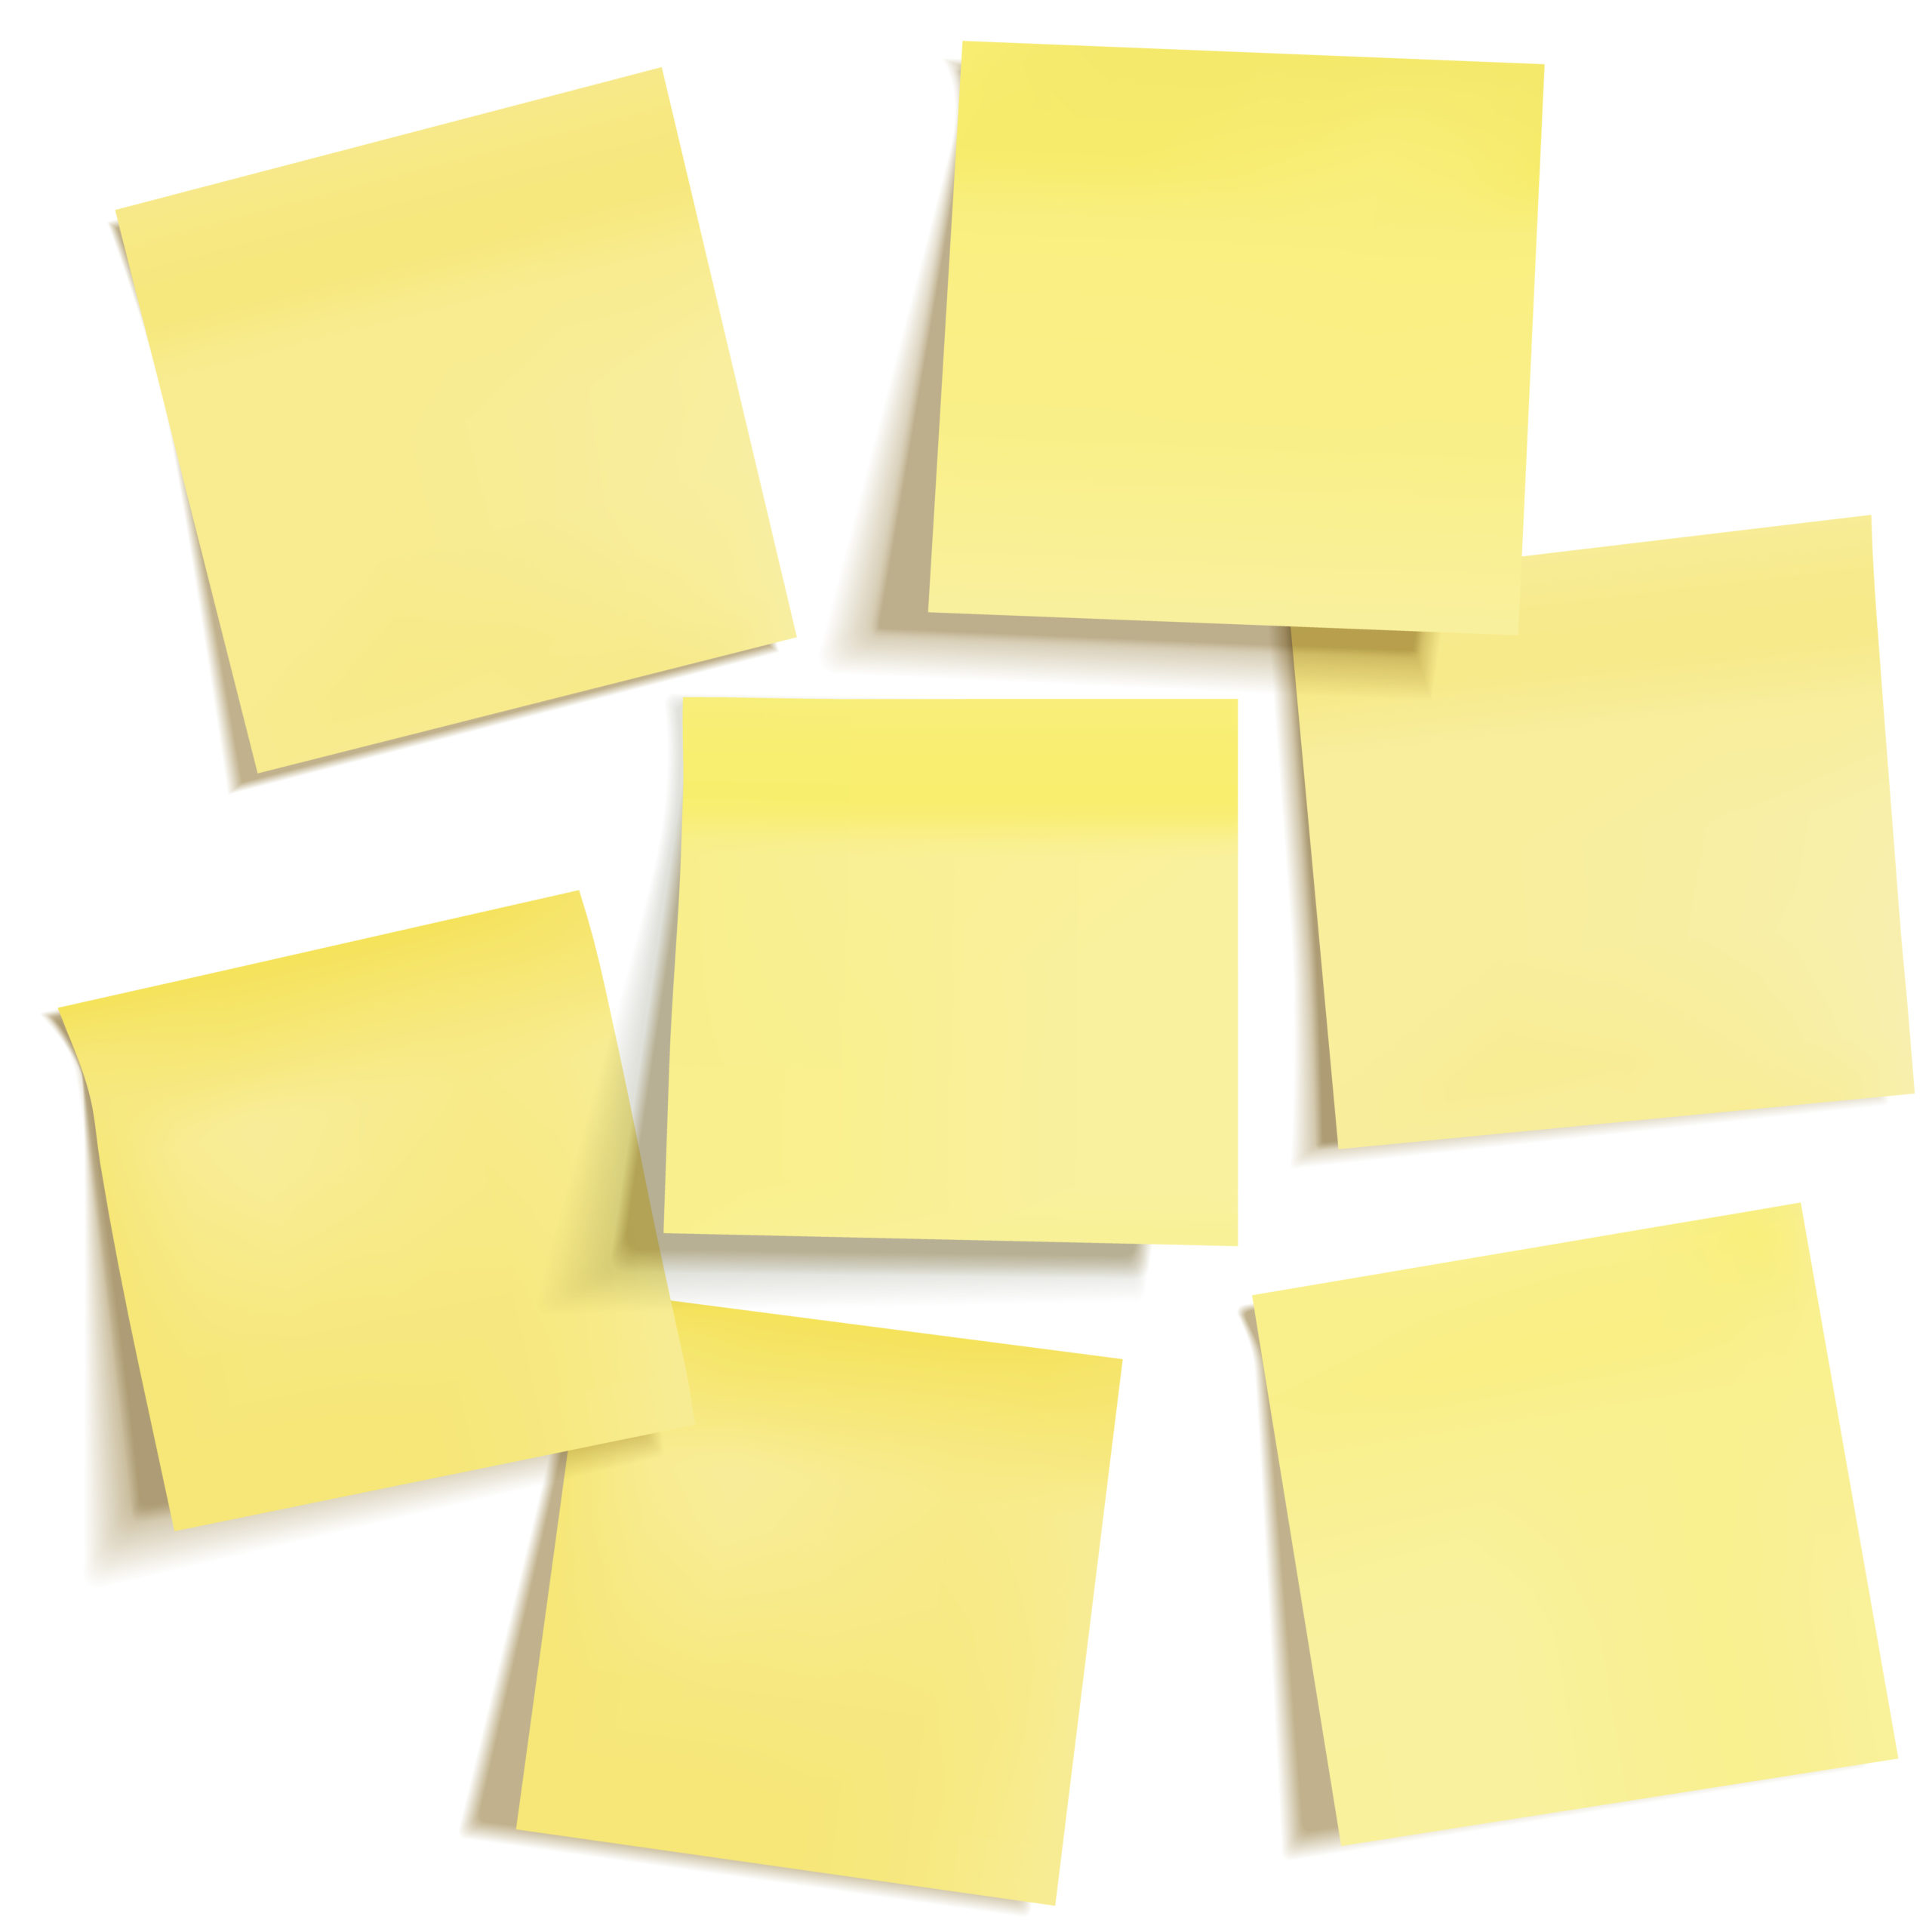 Set,Of,Different,Yellow,Sticky,Note,Papers,,Ready,For,Your